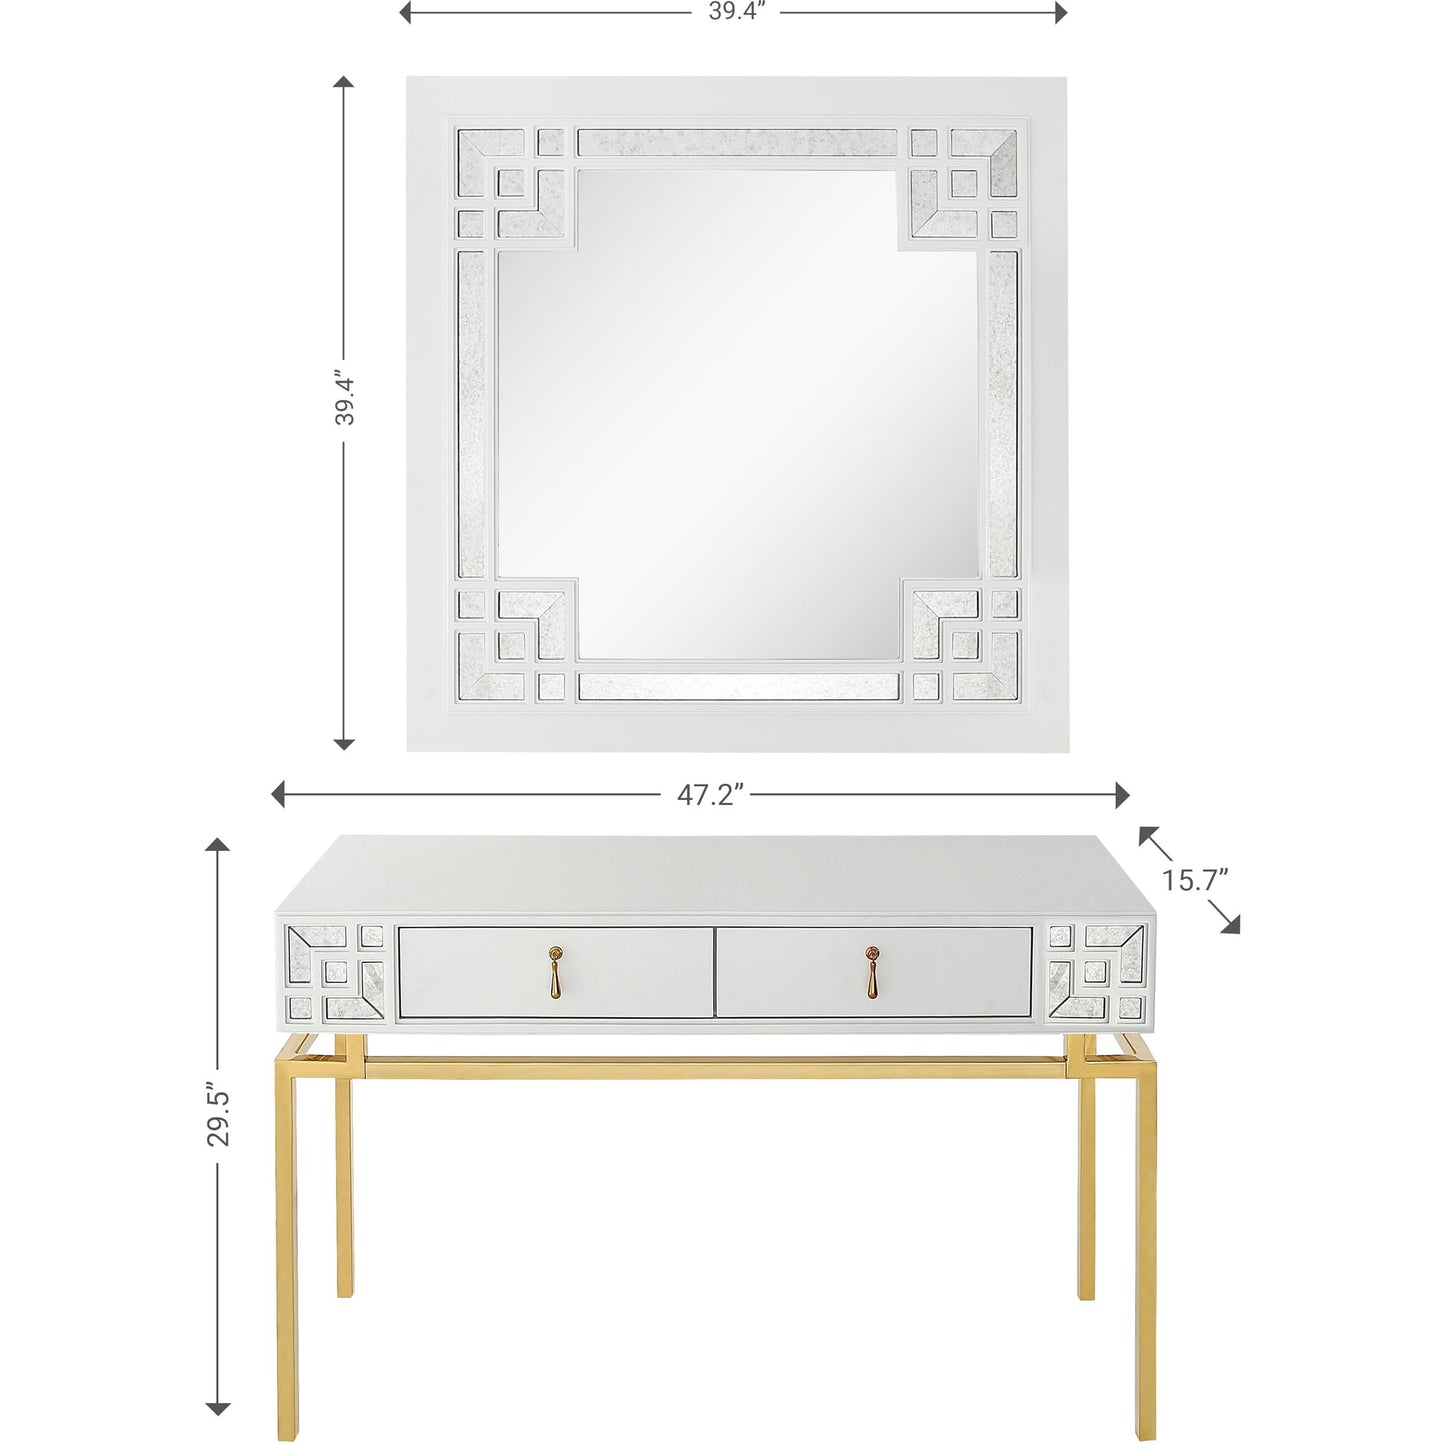 Dynasty Wall Mirror and Console Table